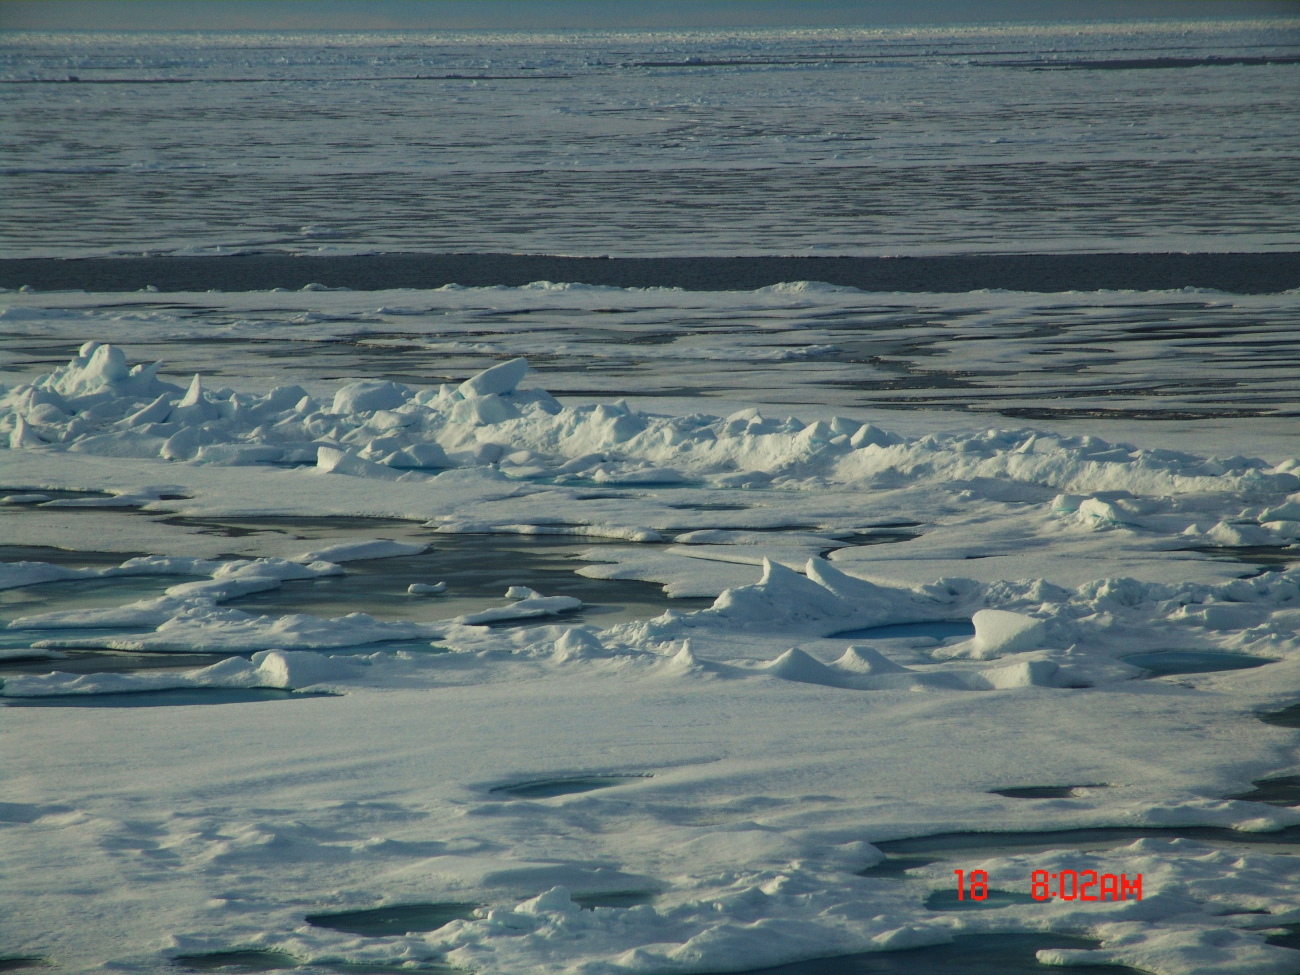 Relative thick 2nd year to multi-year ice separated from newer thinner ice by asmall ice ridge